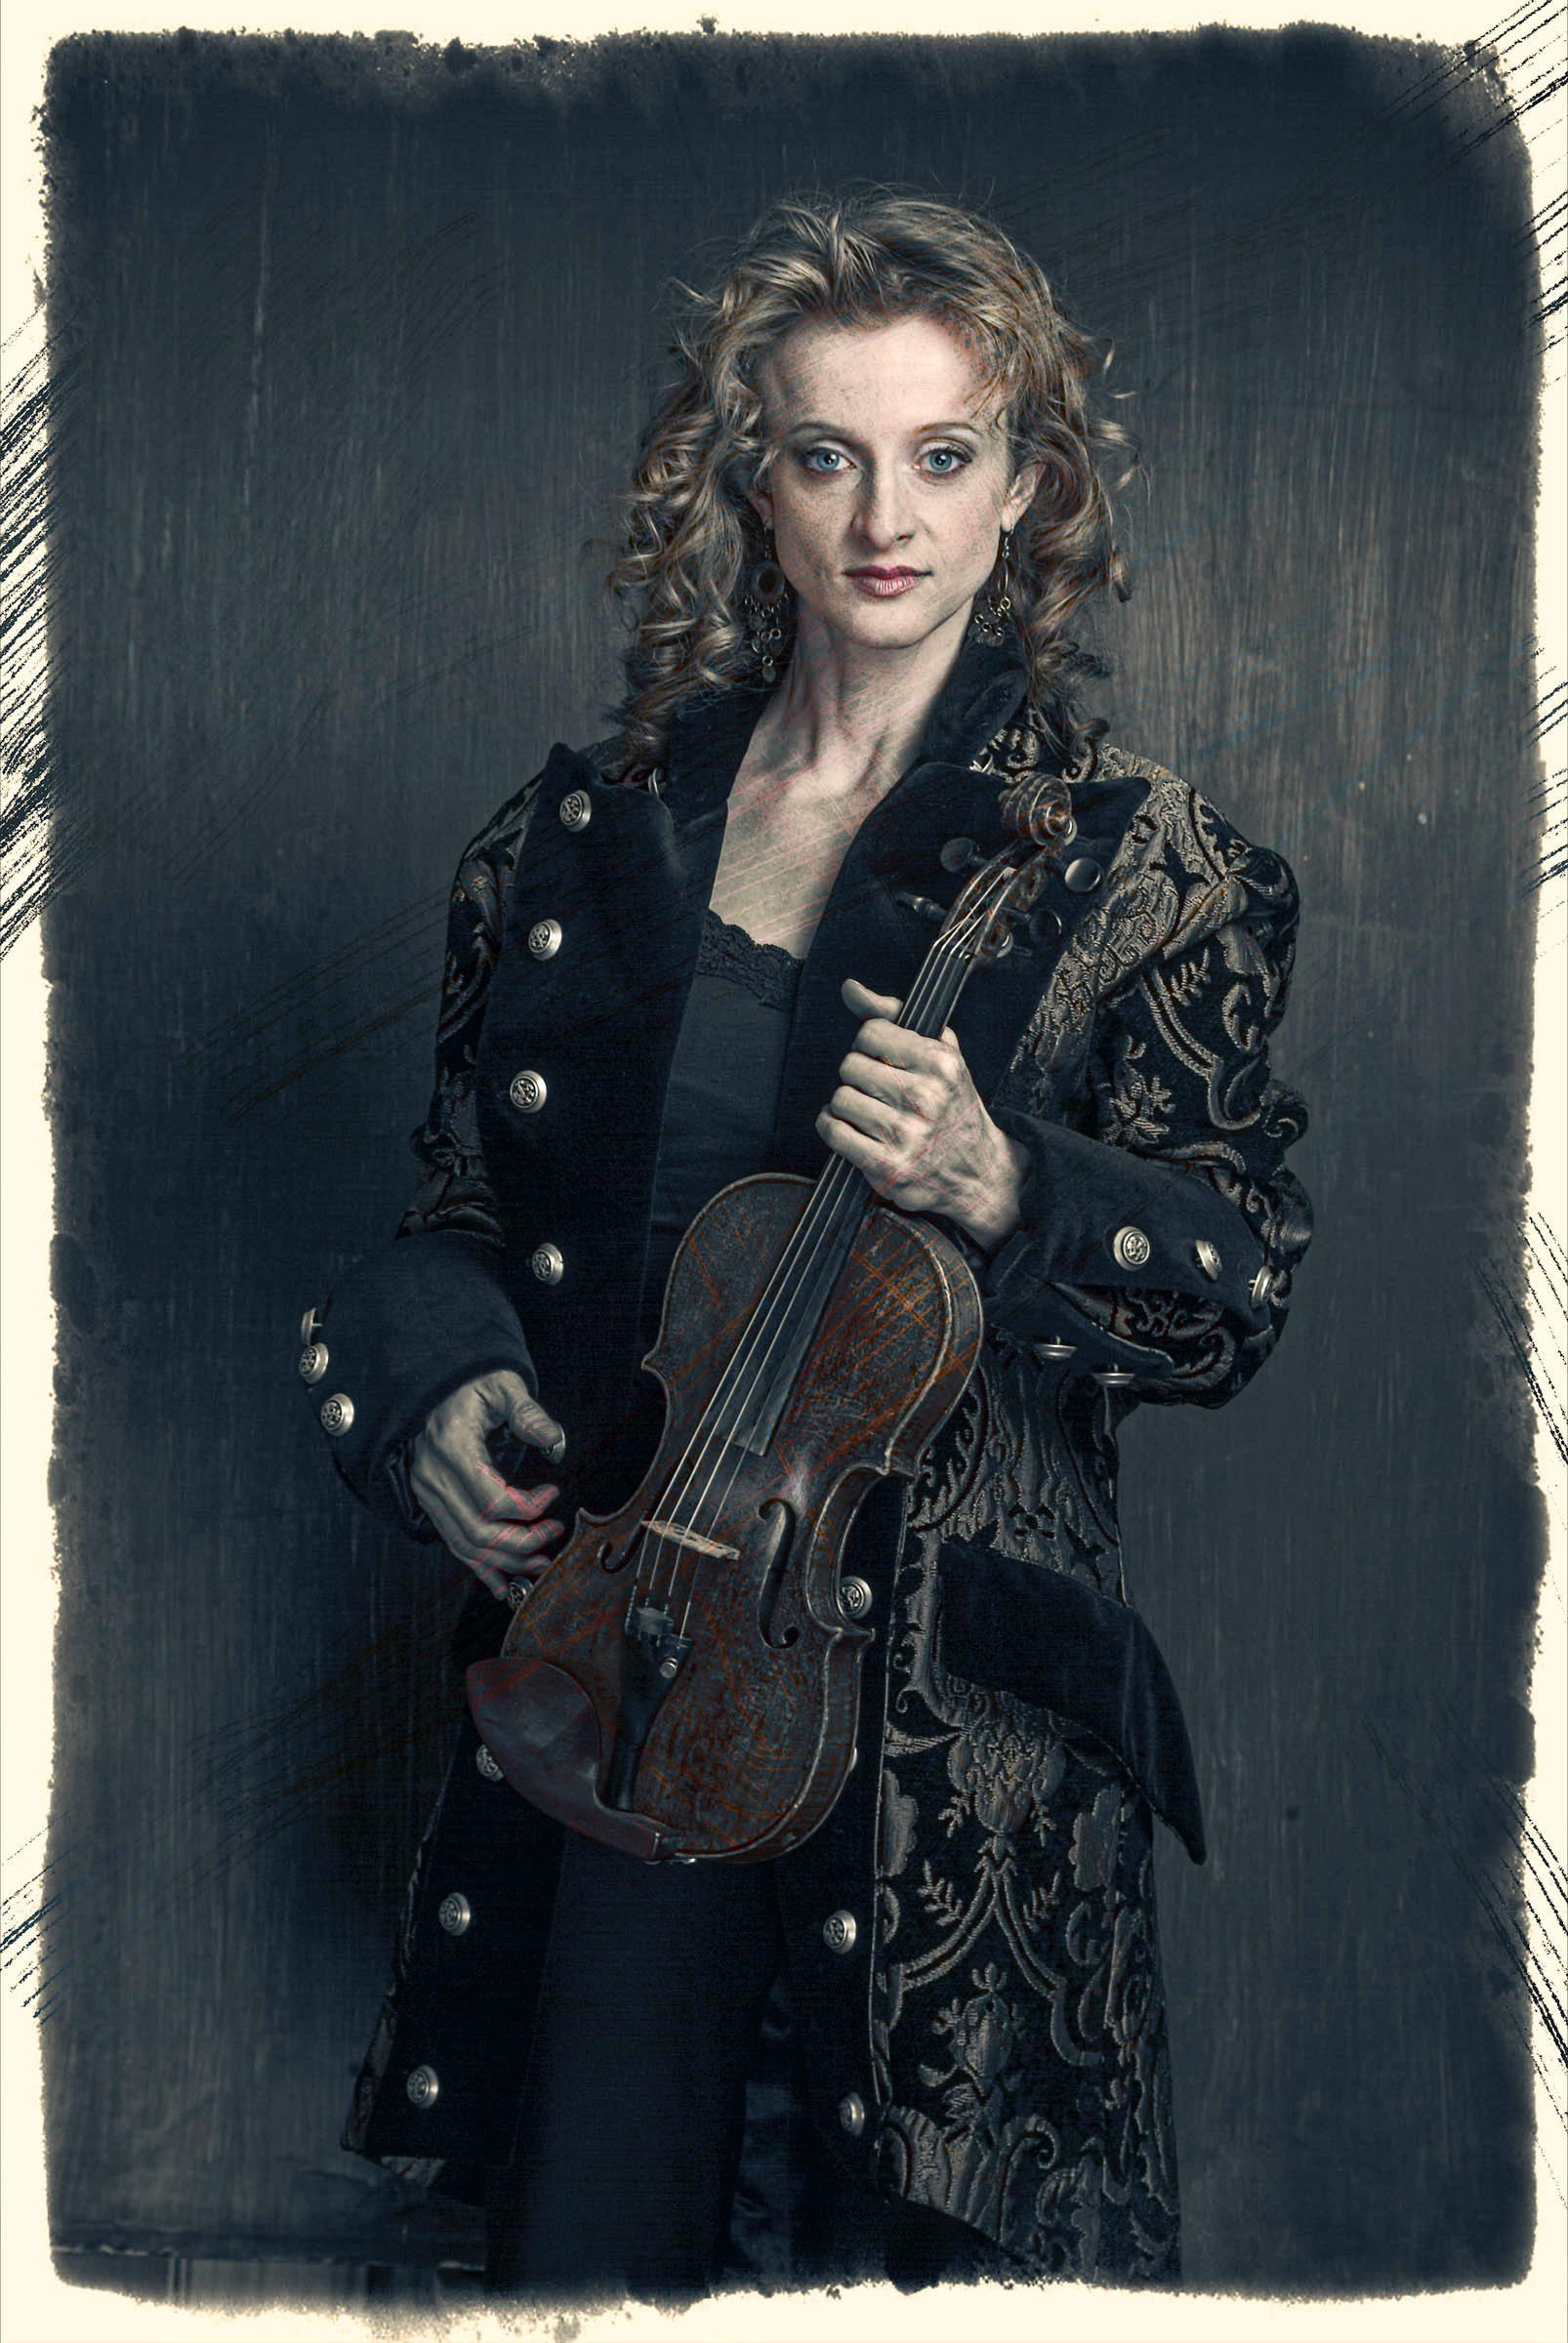 Violinist Musician Portrait Photographer by Tess Steinkolk NYC Portraiture and Actors and Executive Headshots